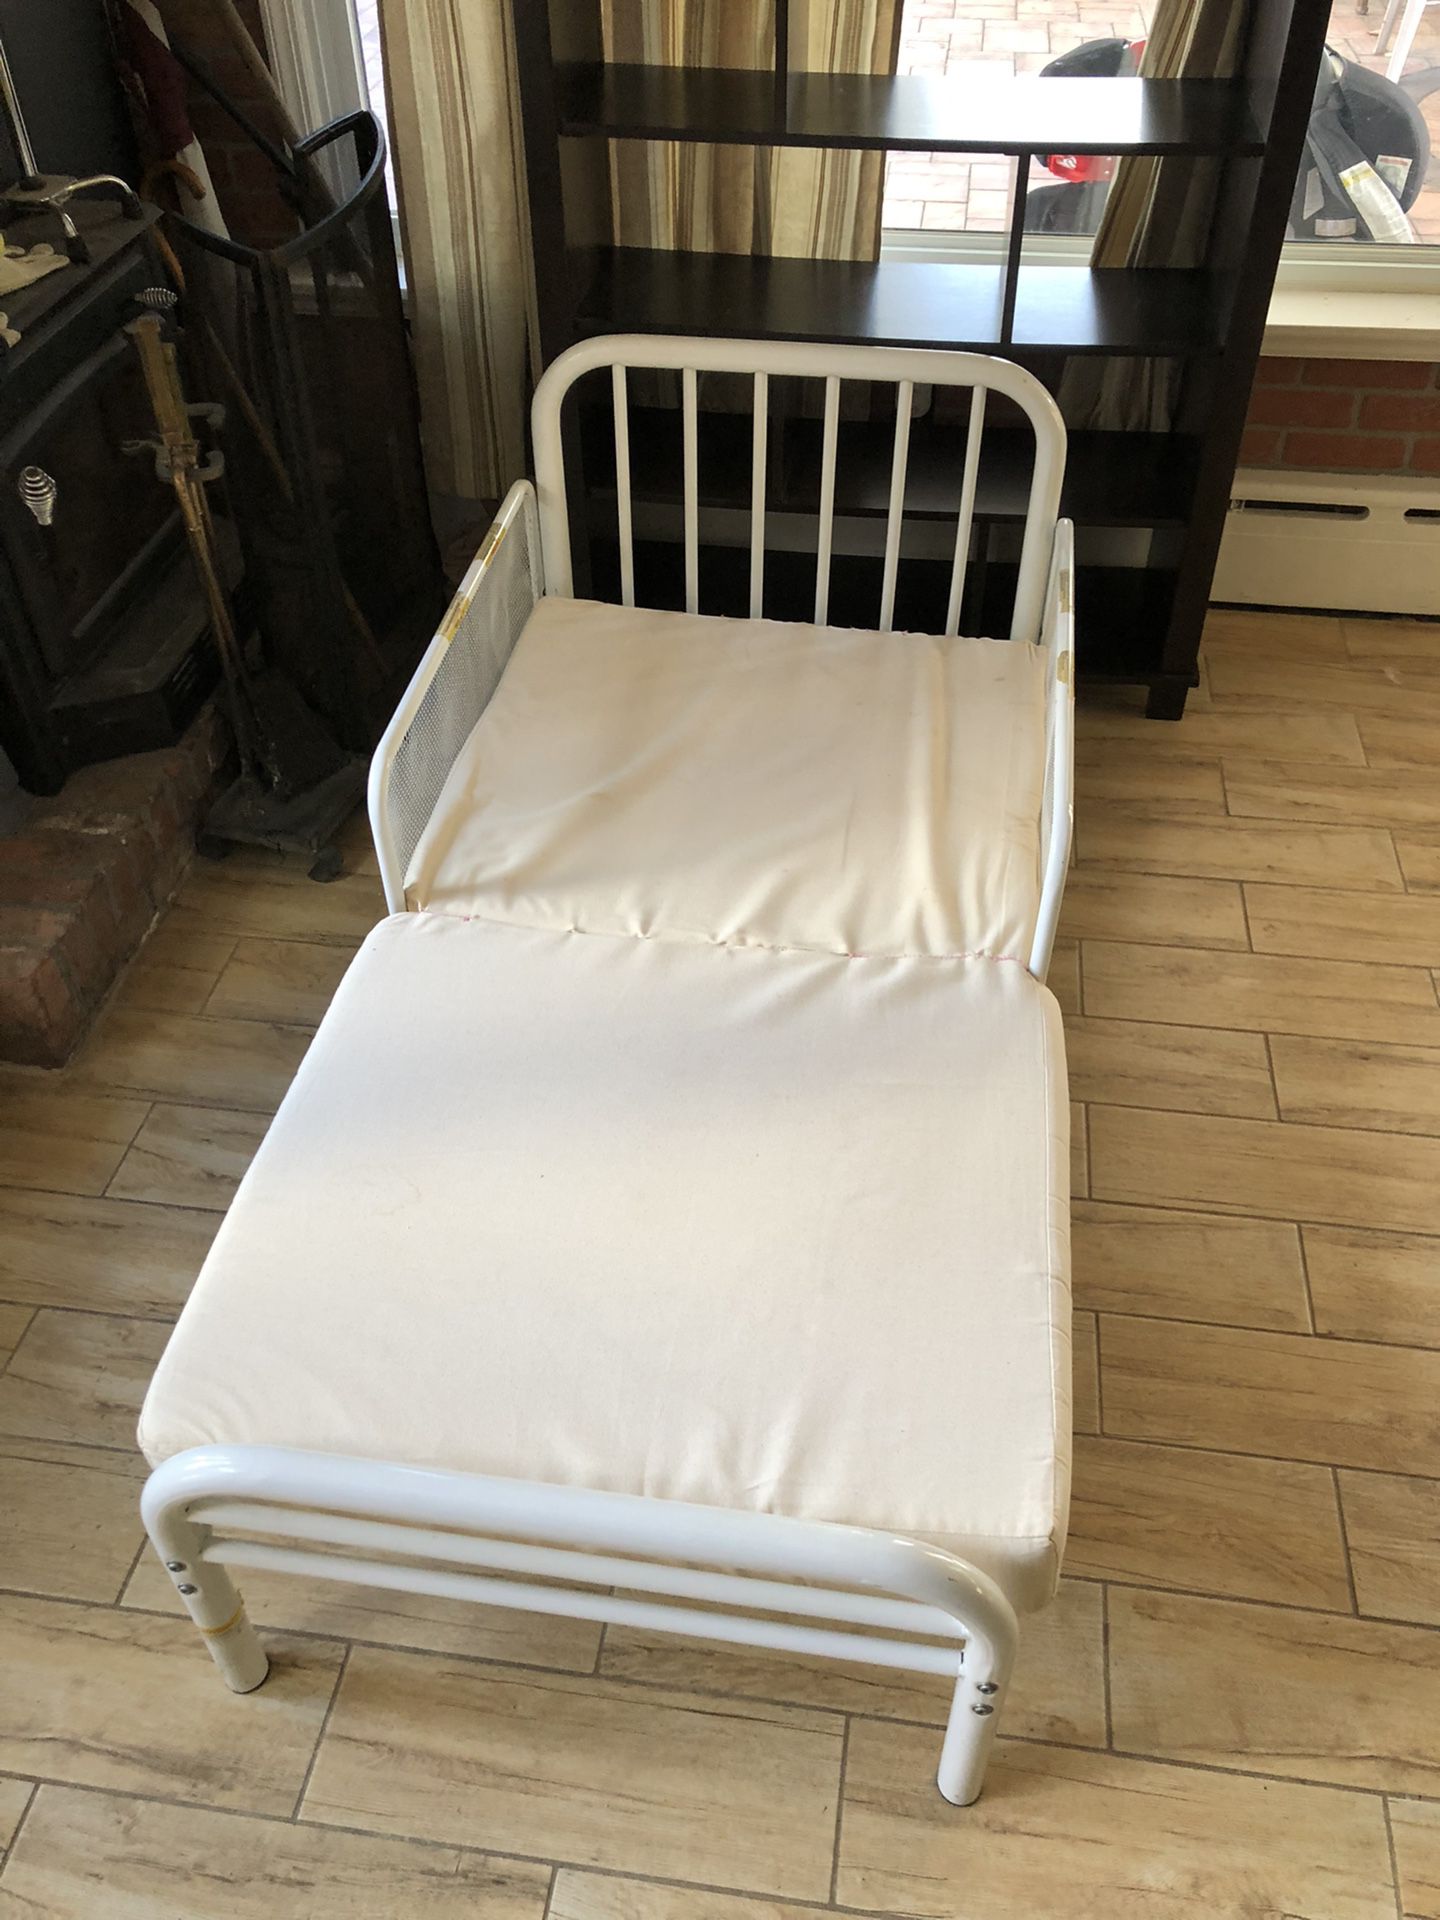 Metal Toddler Bed With Mattress 